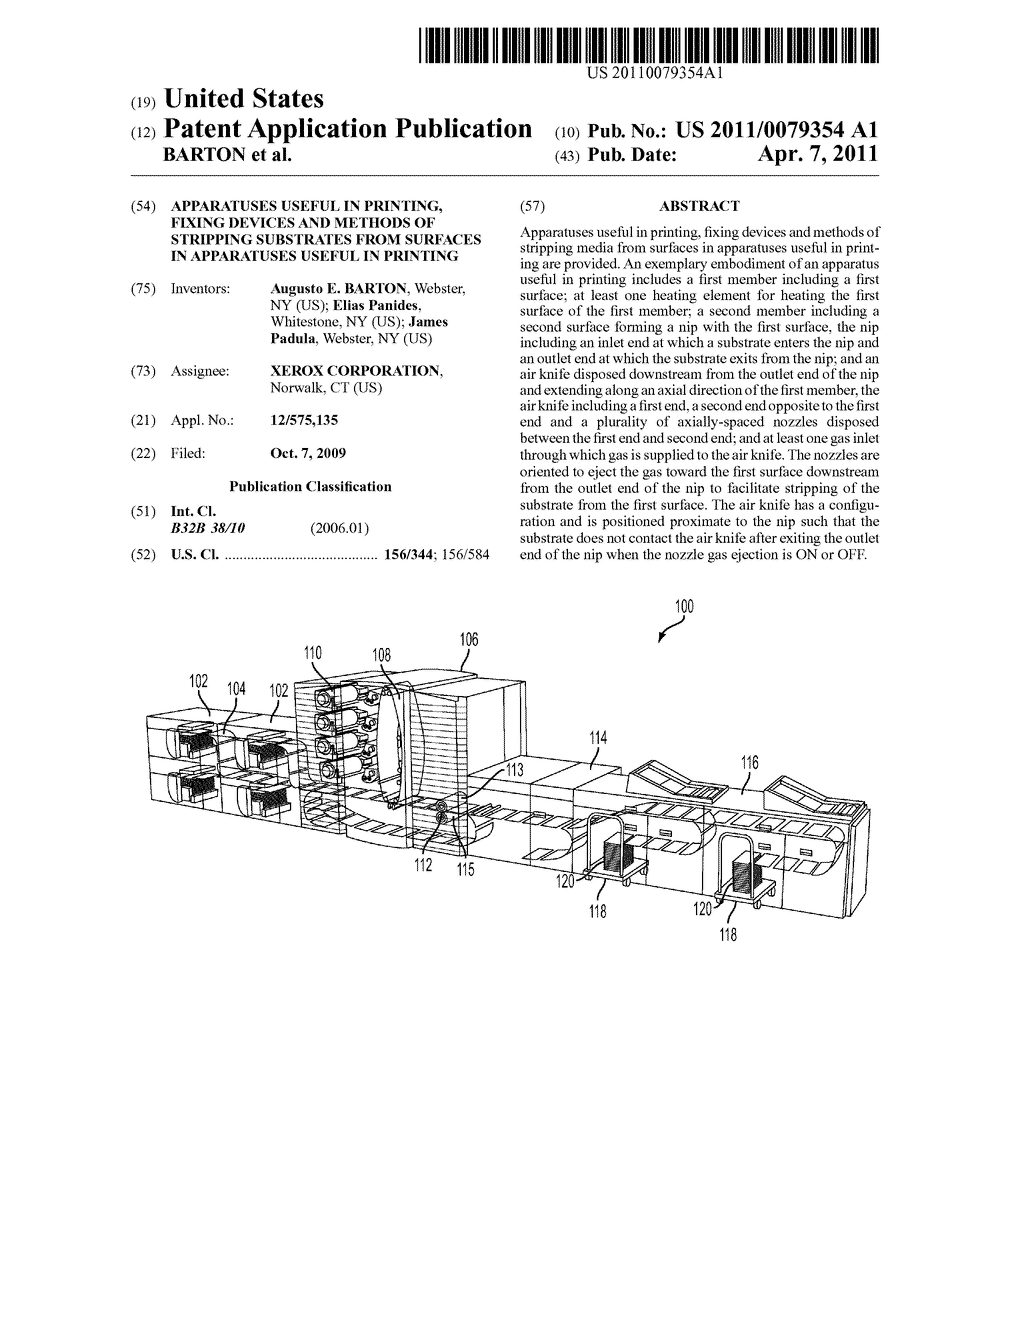 APPARATUSES USEFUL IN PRINTING, FIXING DEVICES AND METHODS OF STRIPPING SUBSTRATES FROM SURFACES IN APPARATUSES USEFUL IN PRINTING - diagram, schematic, and image 01